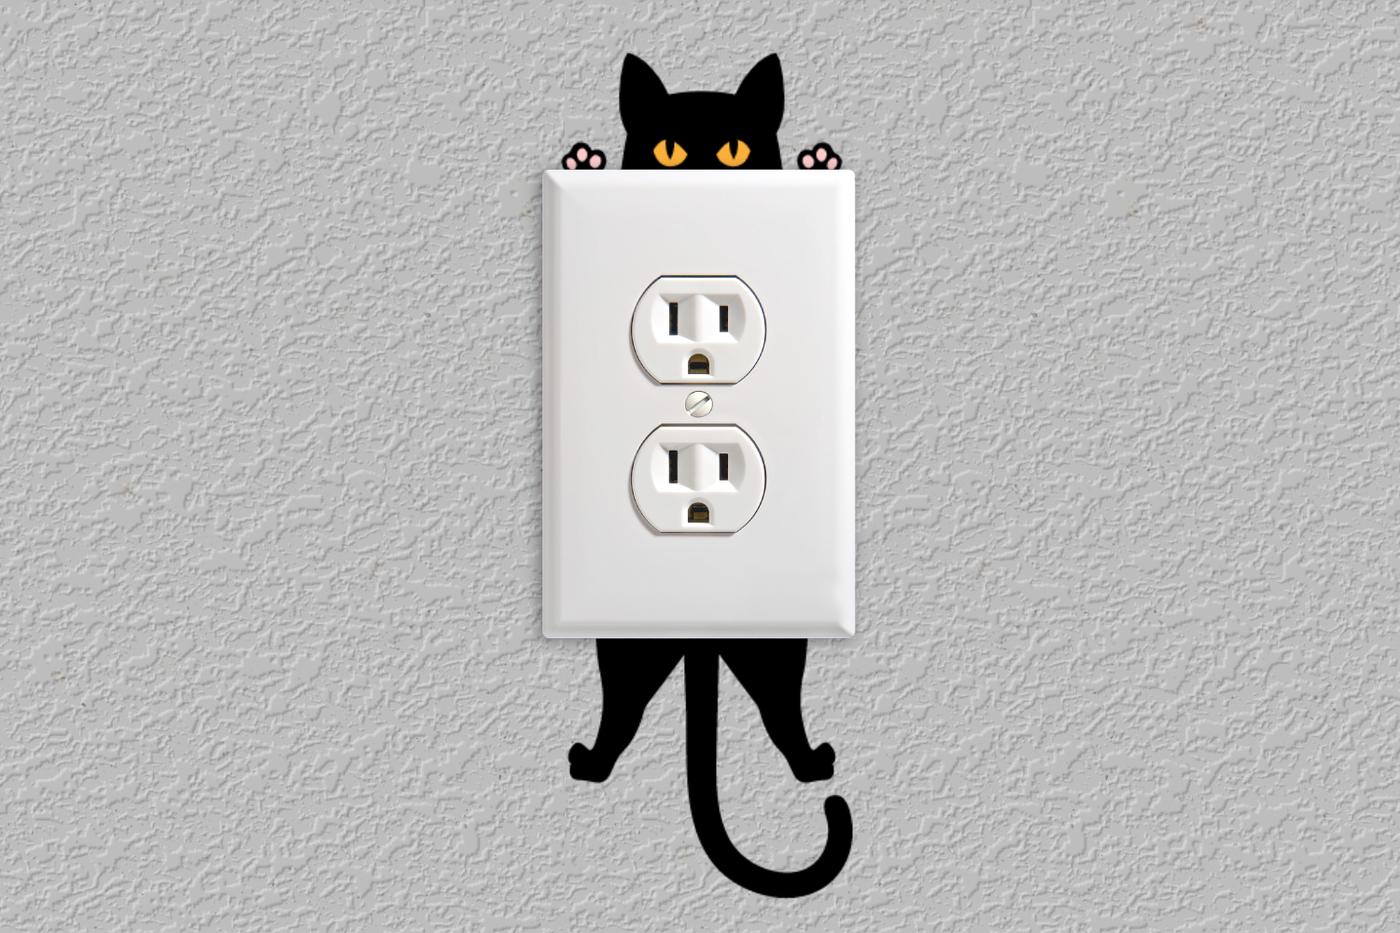 Outlet cover with a cat design on the wall behind it, making it look like the cat is hanging from behind the cover.